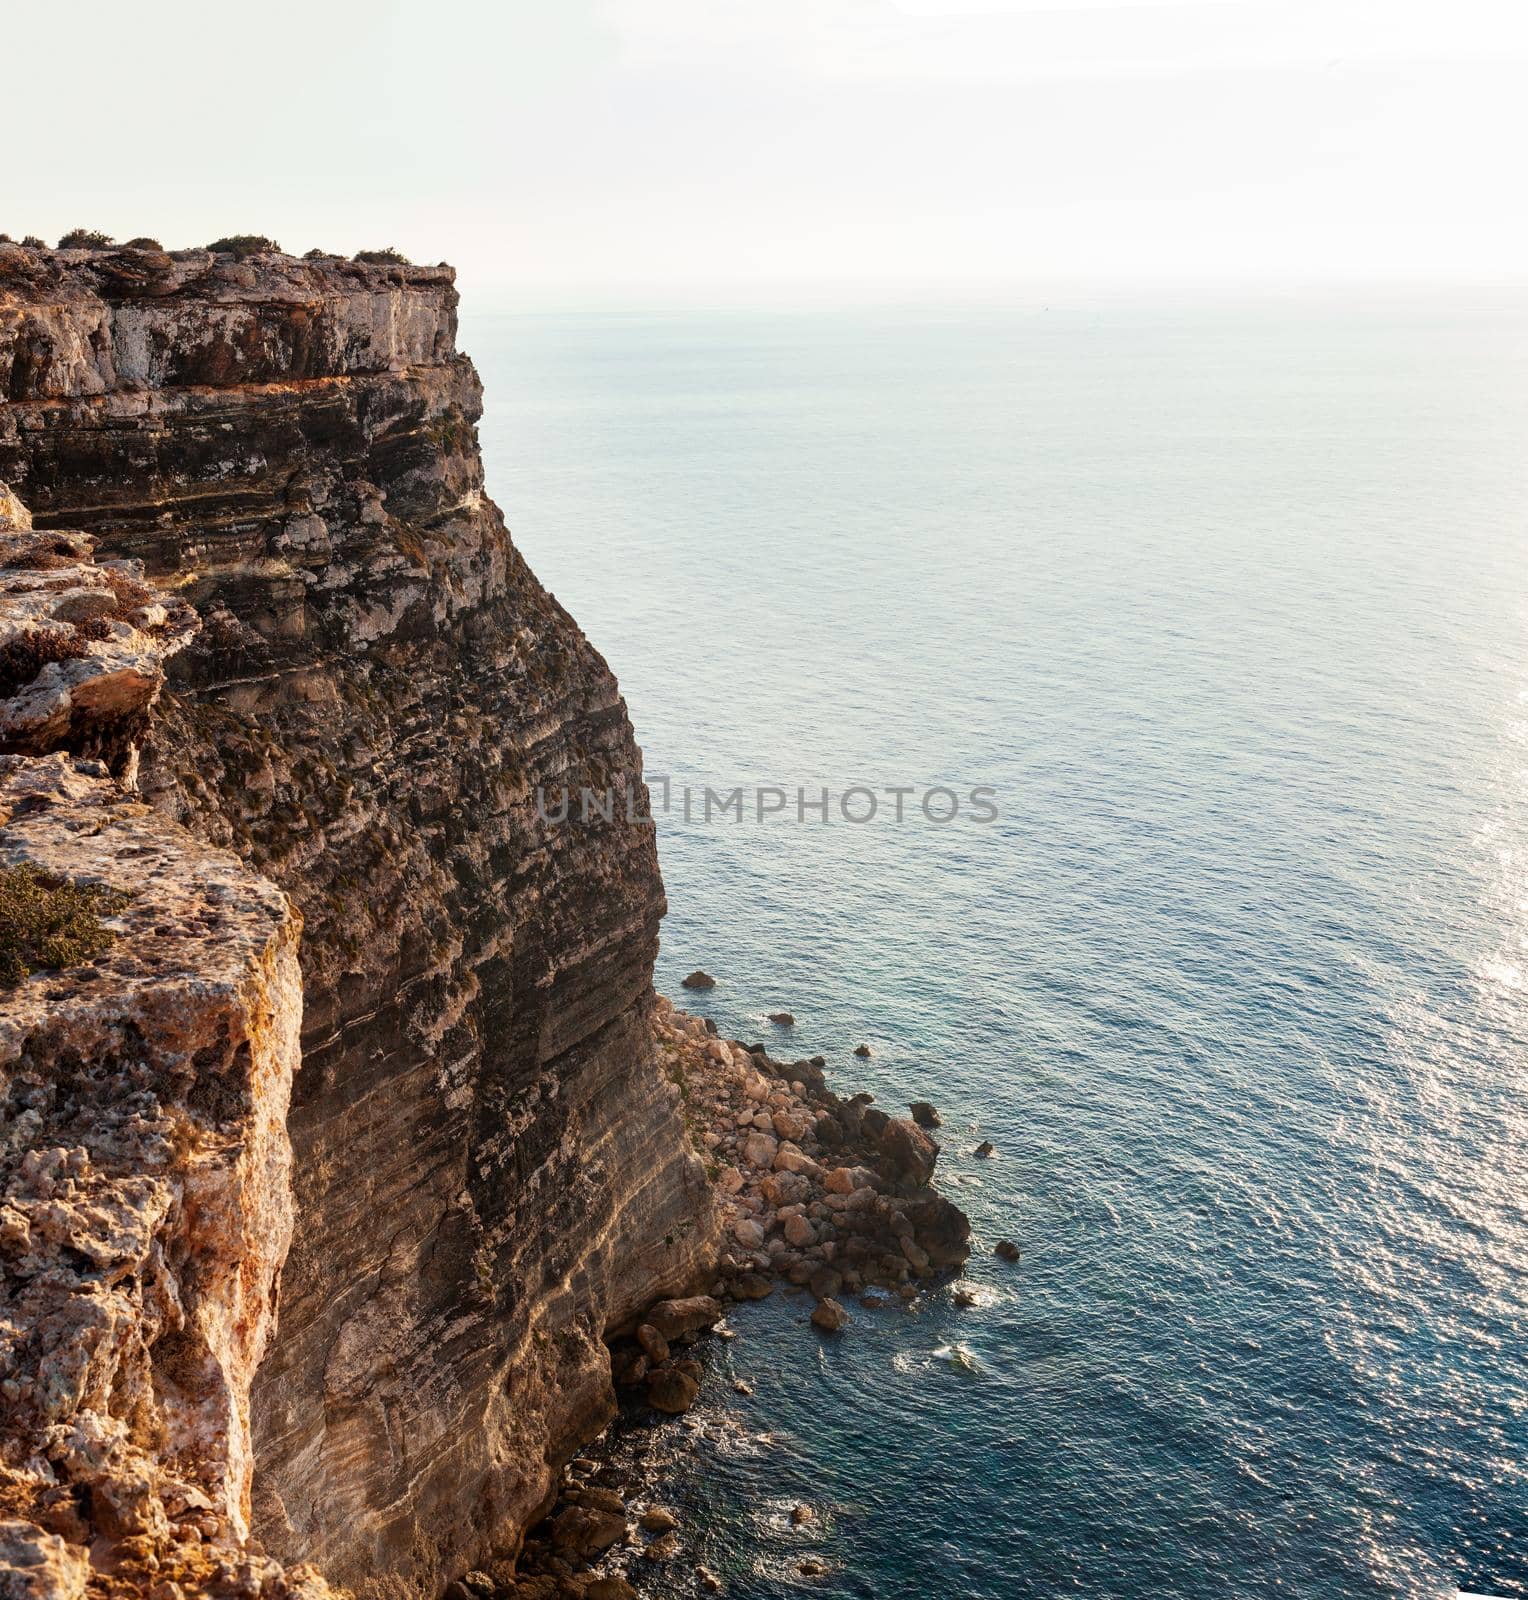 View of the scenic cliff coast of Lampedusa, Sicily